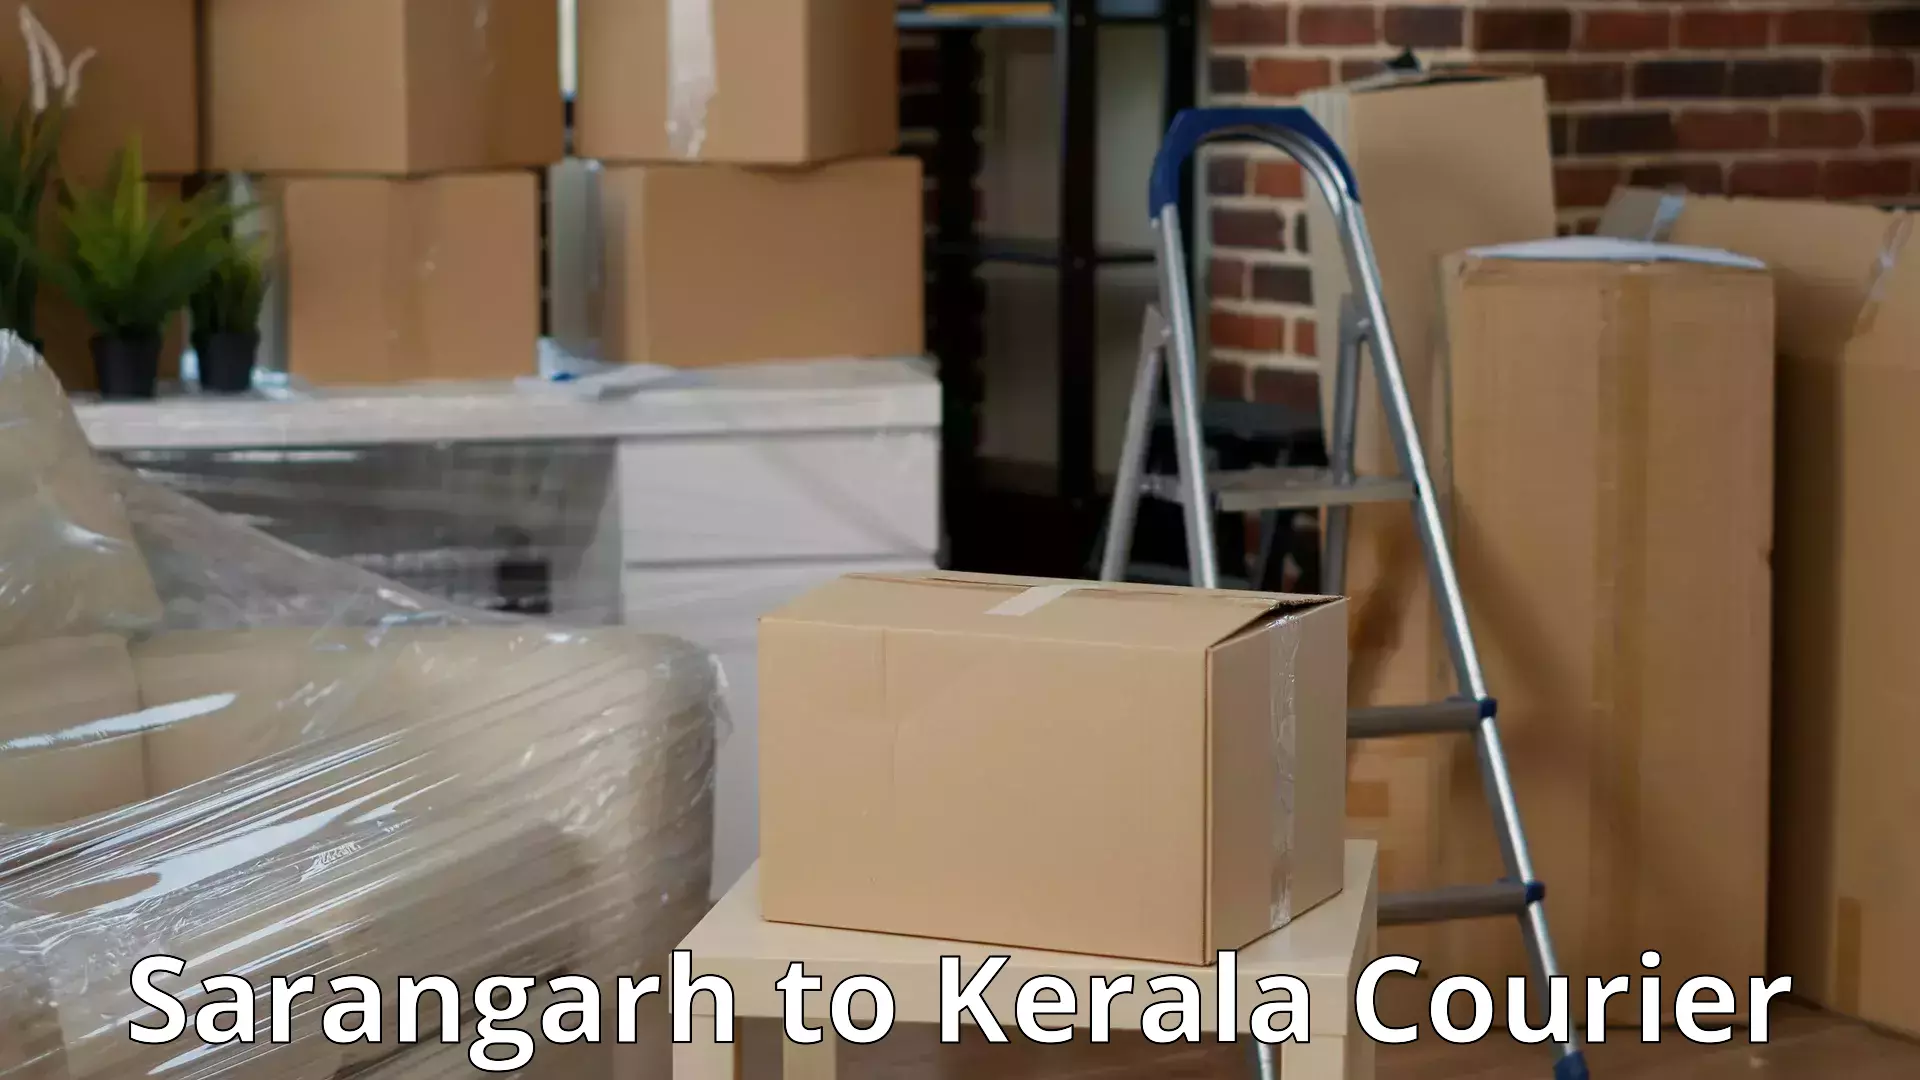 Residential relocation services Sarangarh to Kilimanoor